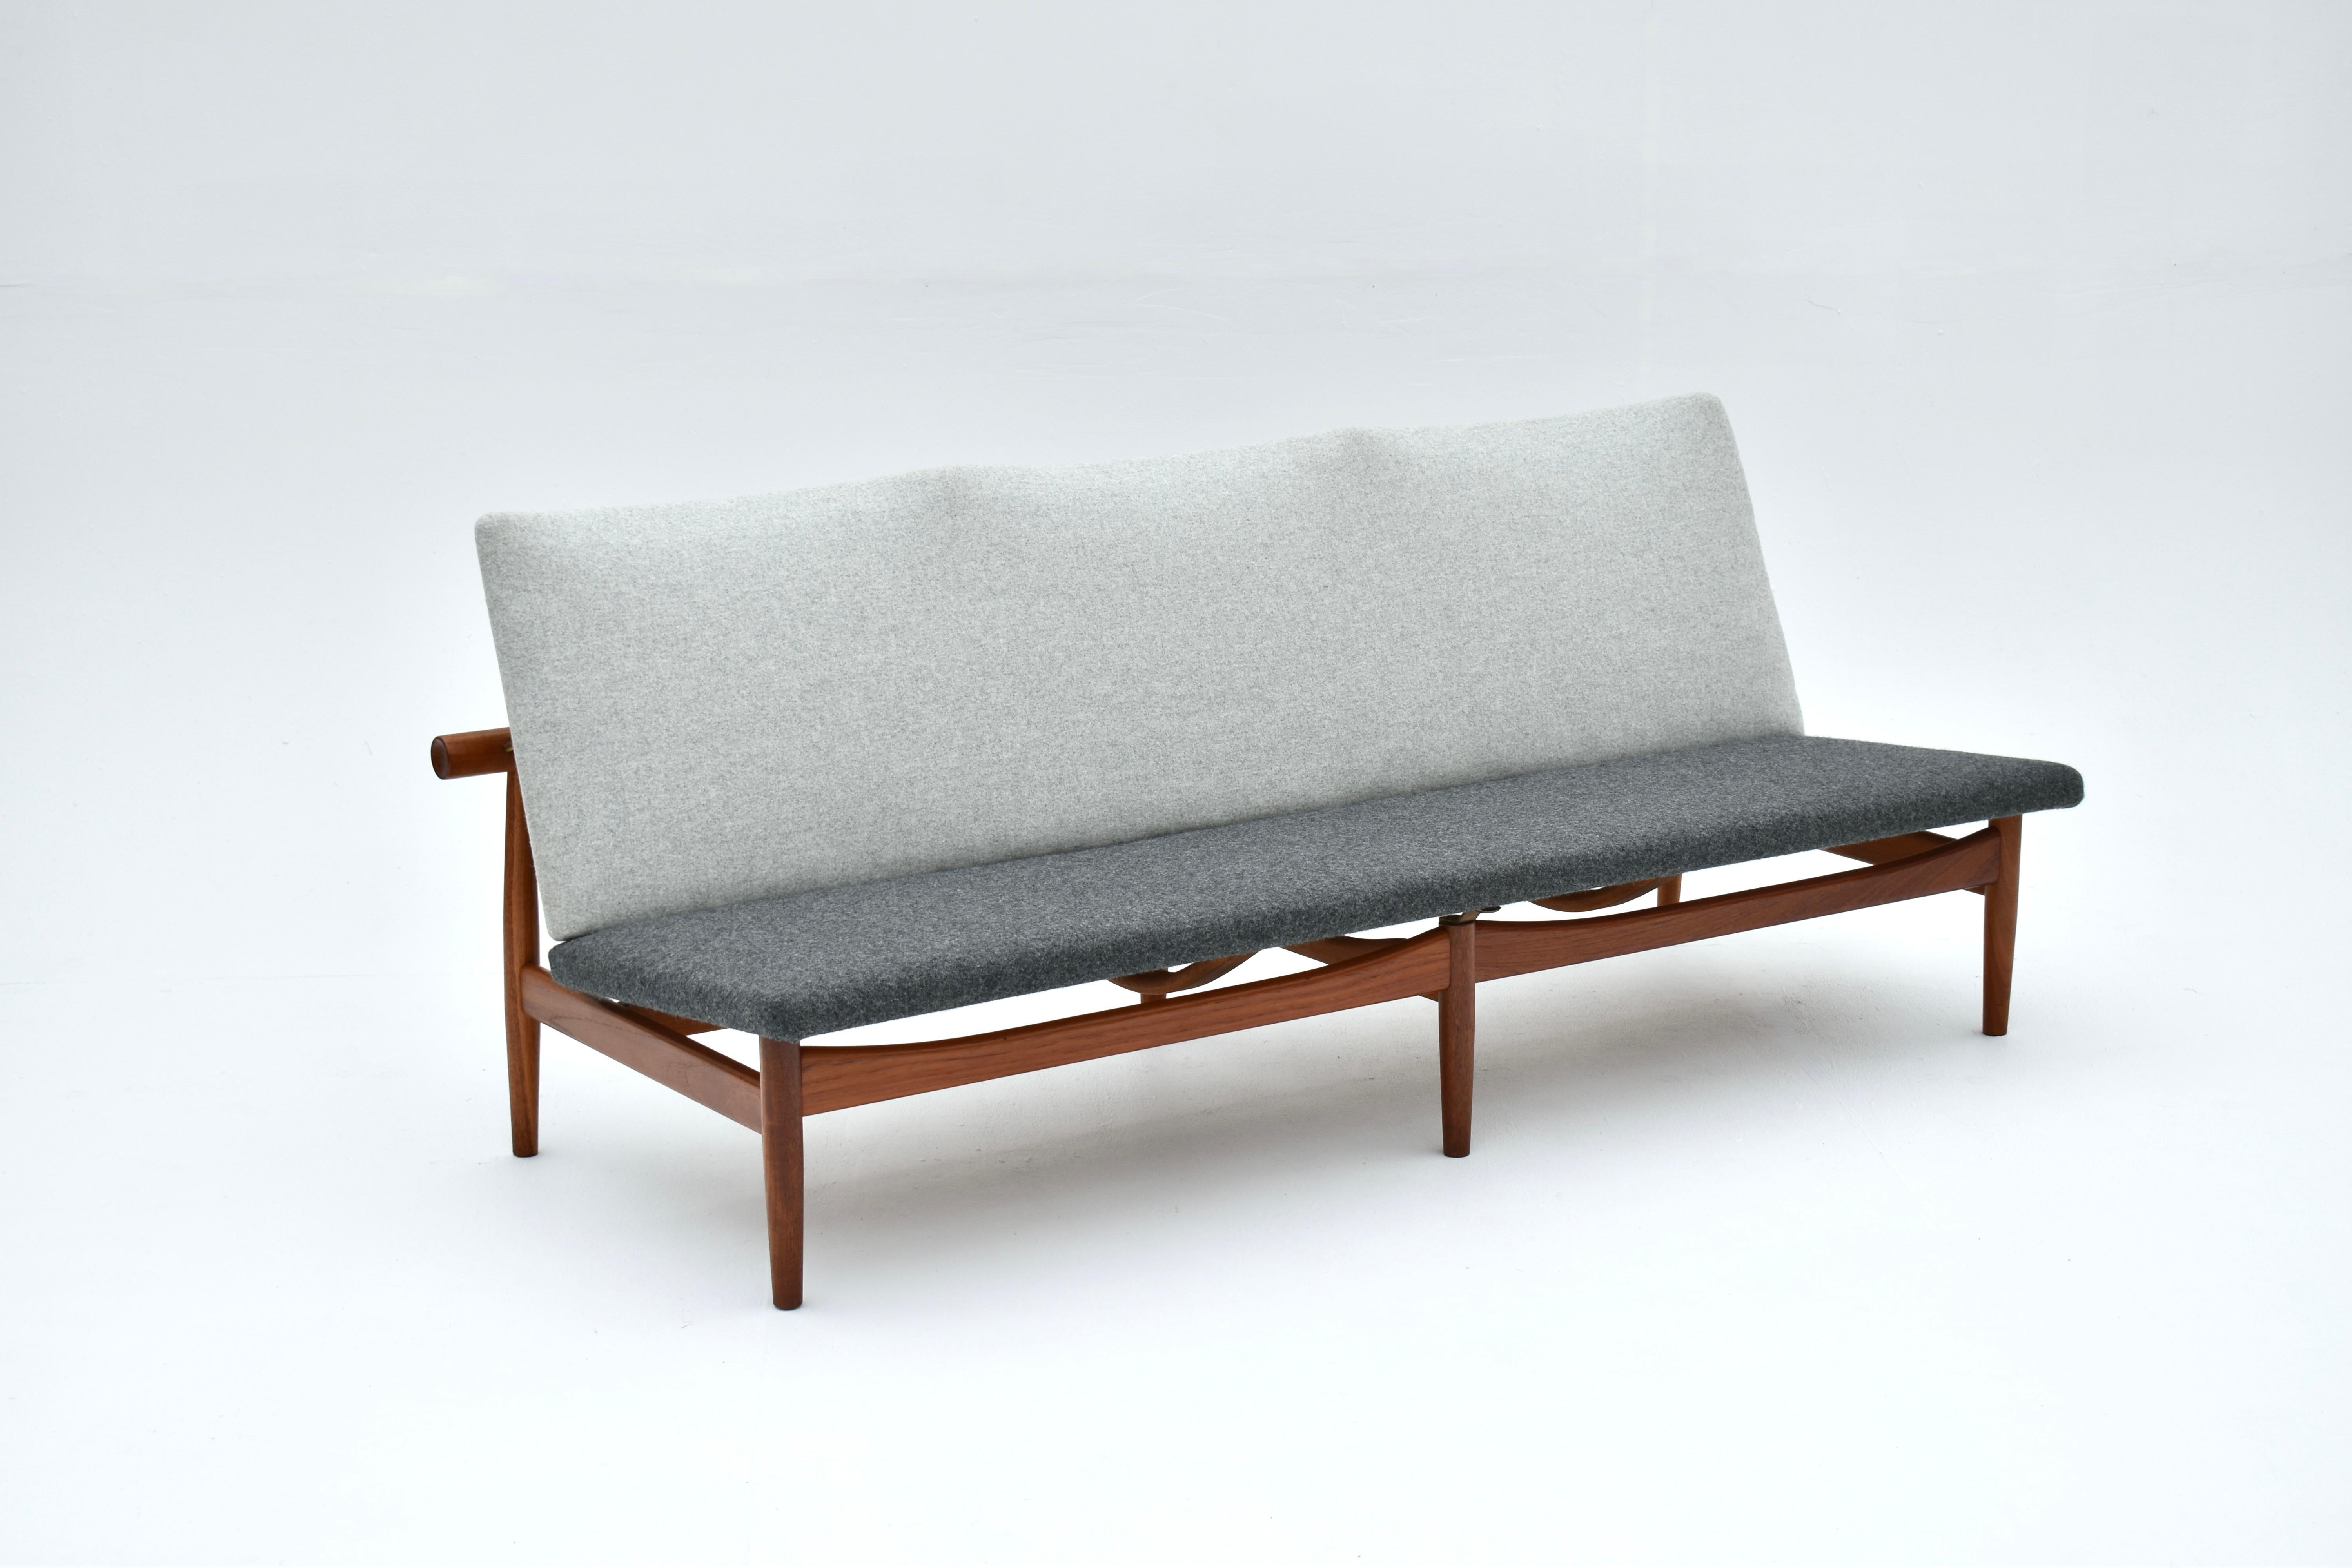 Original solid teak Japan sofa designed by Finn Juhl in 1957 for France & Son, Denmark.

An incredibly hard to find item which is a superb showcase for Juhl's unique approach to design. The Miyajima Water Gate off the coast of Hiroshima was the